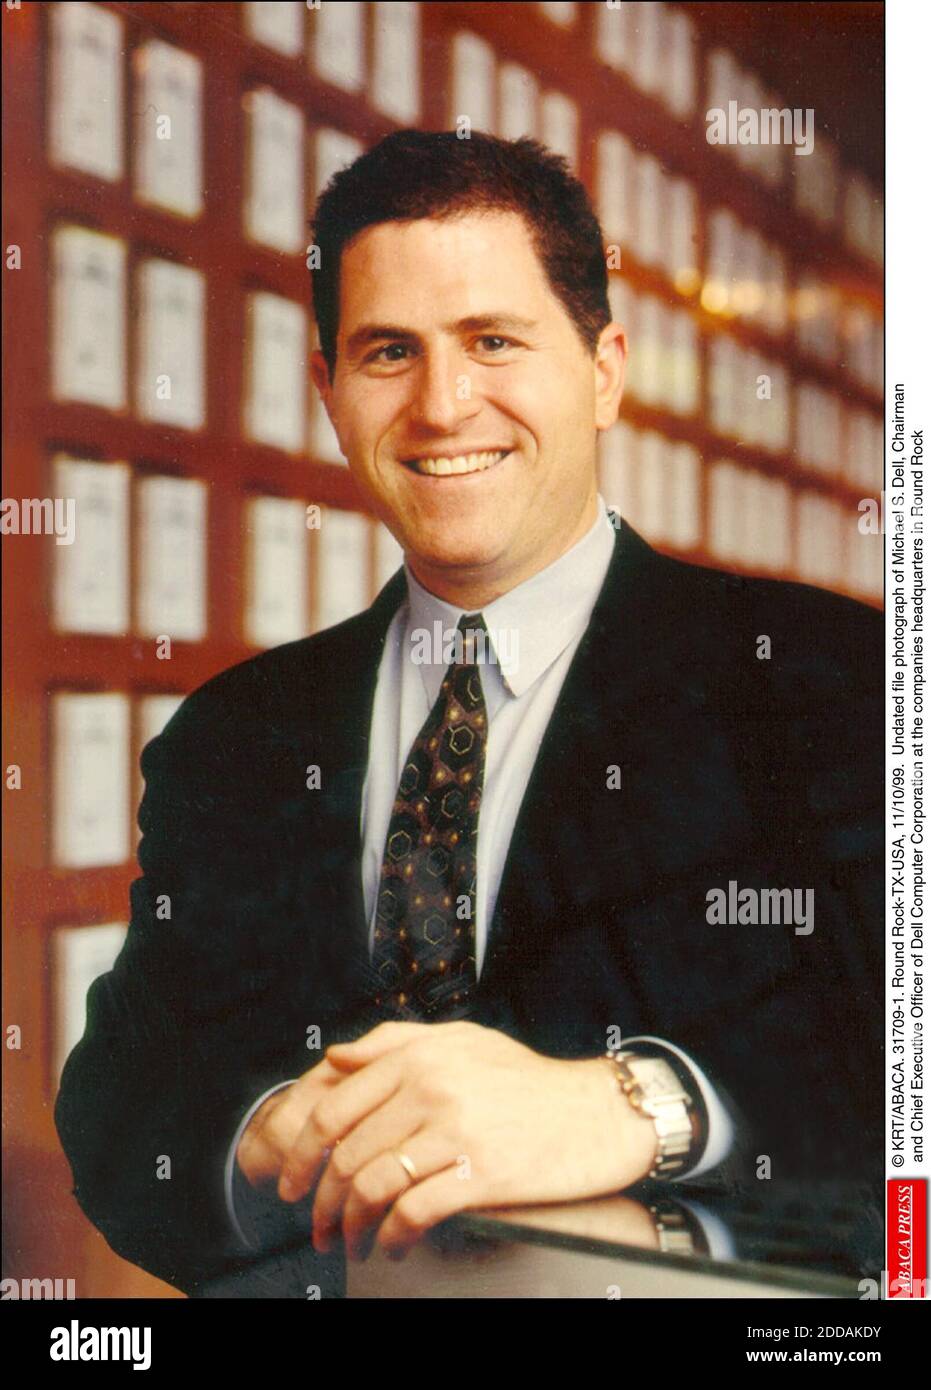 NO FILM, NO VIDEO, NO TV, NO DOCUMENTARY - © KRT/ABACA. 31709-1. Round Rock-TX-USA, 11/10/99. Undated file photograph of Michael S. Dell, Chairman and Chief Executive Officer of Dell Computer Corporation at the companies headquarters in Round Rock Stock Photo